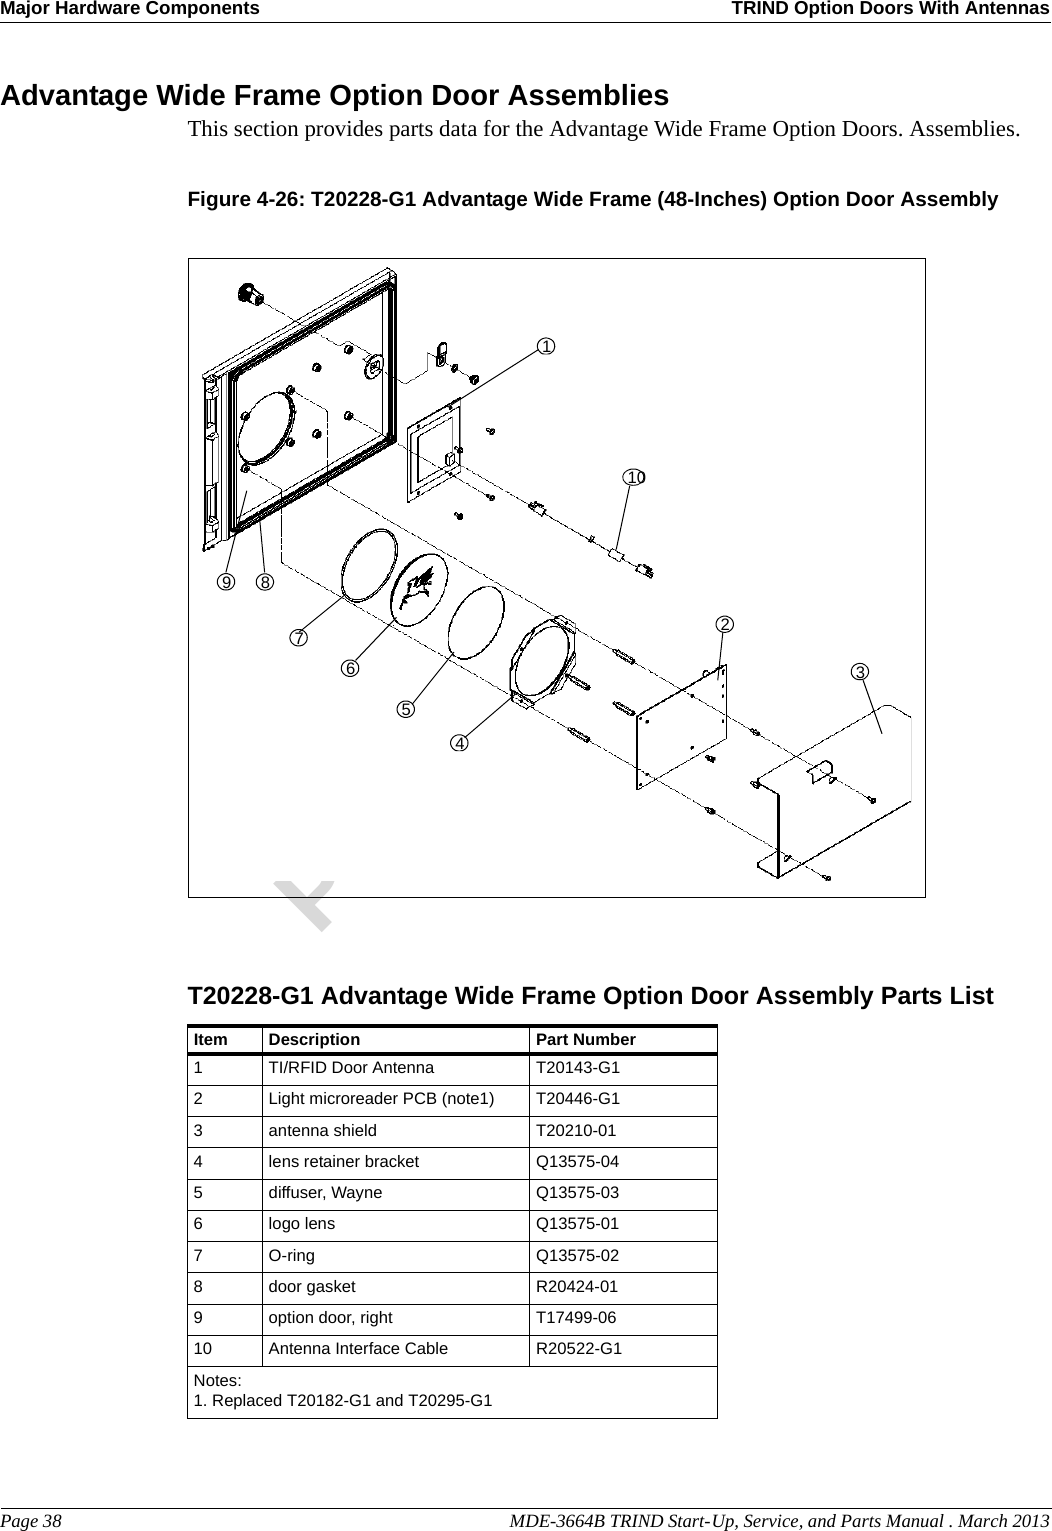 Major Hardware Components TRIND Option Doors With AntennasPage 38                                                                                                  MDE-3664B TRIND Start-Up, Service, and Parts Manual . March 2013PreliminaryAdvantage Wide Frame Option Door AssembliesThis section provides parts data for the Advantage Wide Frame Option Doors. Assemblies.Figure 4-26: T20228-G1 Advantage Wide Frame (48-Inches) Option Door Assembly19876542310T20228-G1 Advantage Wide Frame Option Door Assembly Parts ListItem Description Part Number1TI/RFID Door Antenna T20143-G12Light microreader PCB (note1) T20446-G13antenna shield T20210-014lens retainer bracket Q13575-045diffuser, Wayne Q13575-036logo lens Q13575-017O-ring Q13575-028door gasket R20424-019option door, right T17499-0610 Antenna Interface Cable R20522-G1Notes:1. Replaced T20182-G1 and T20295-G1